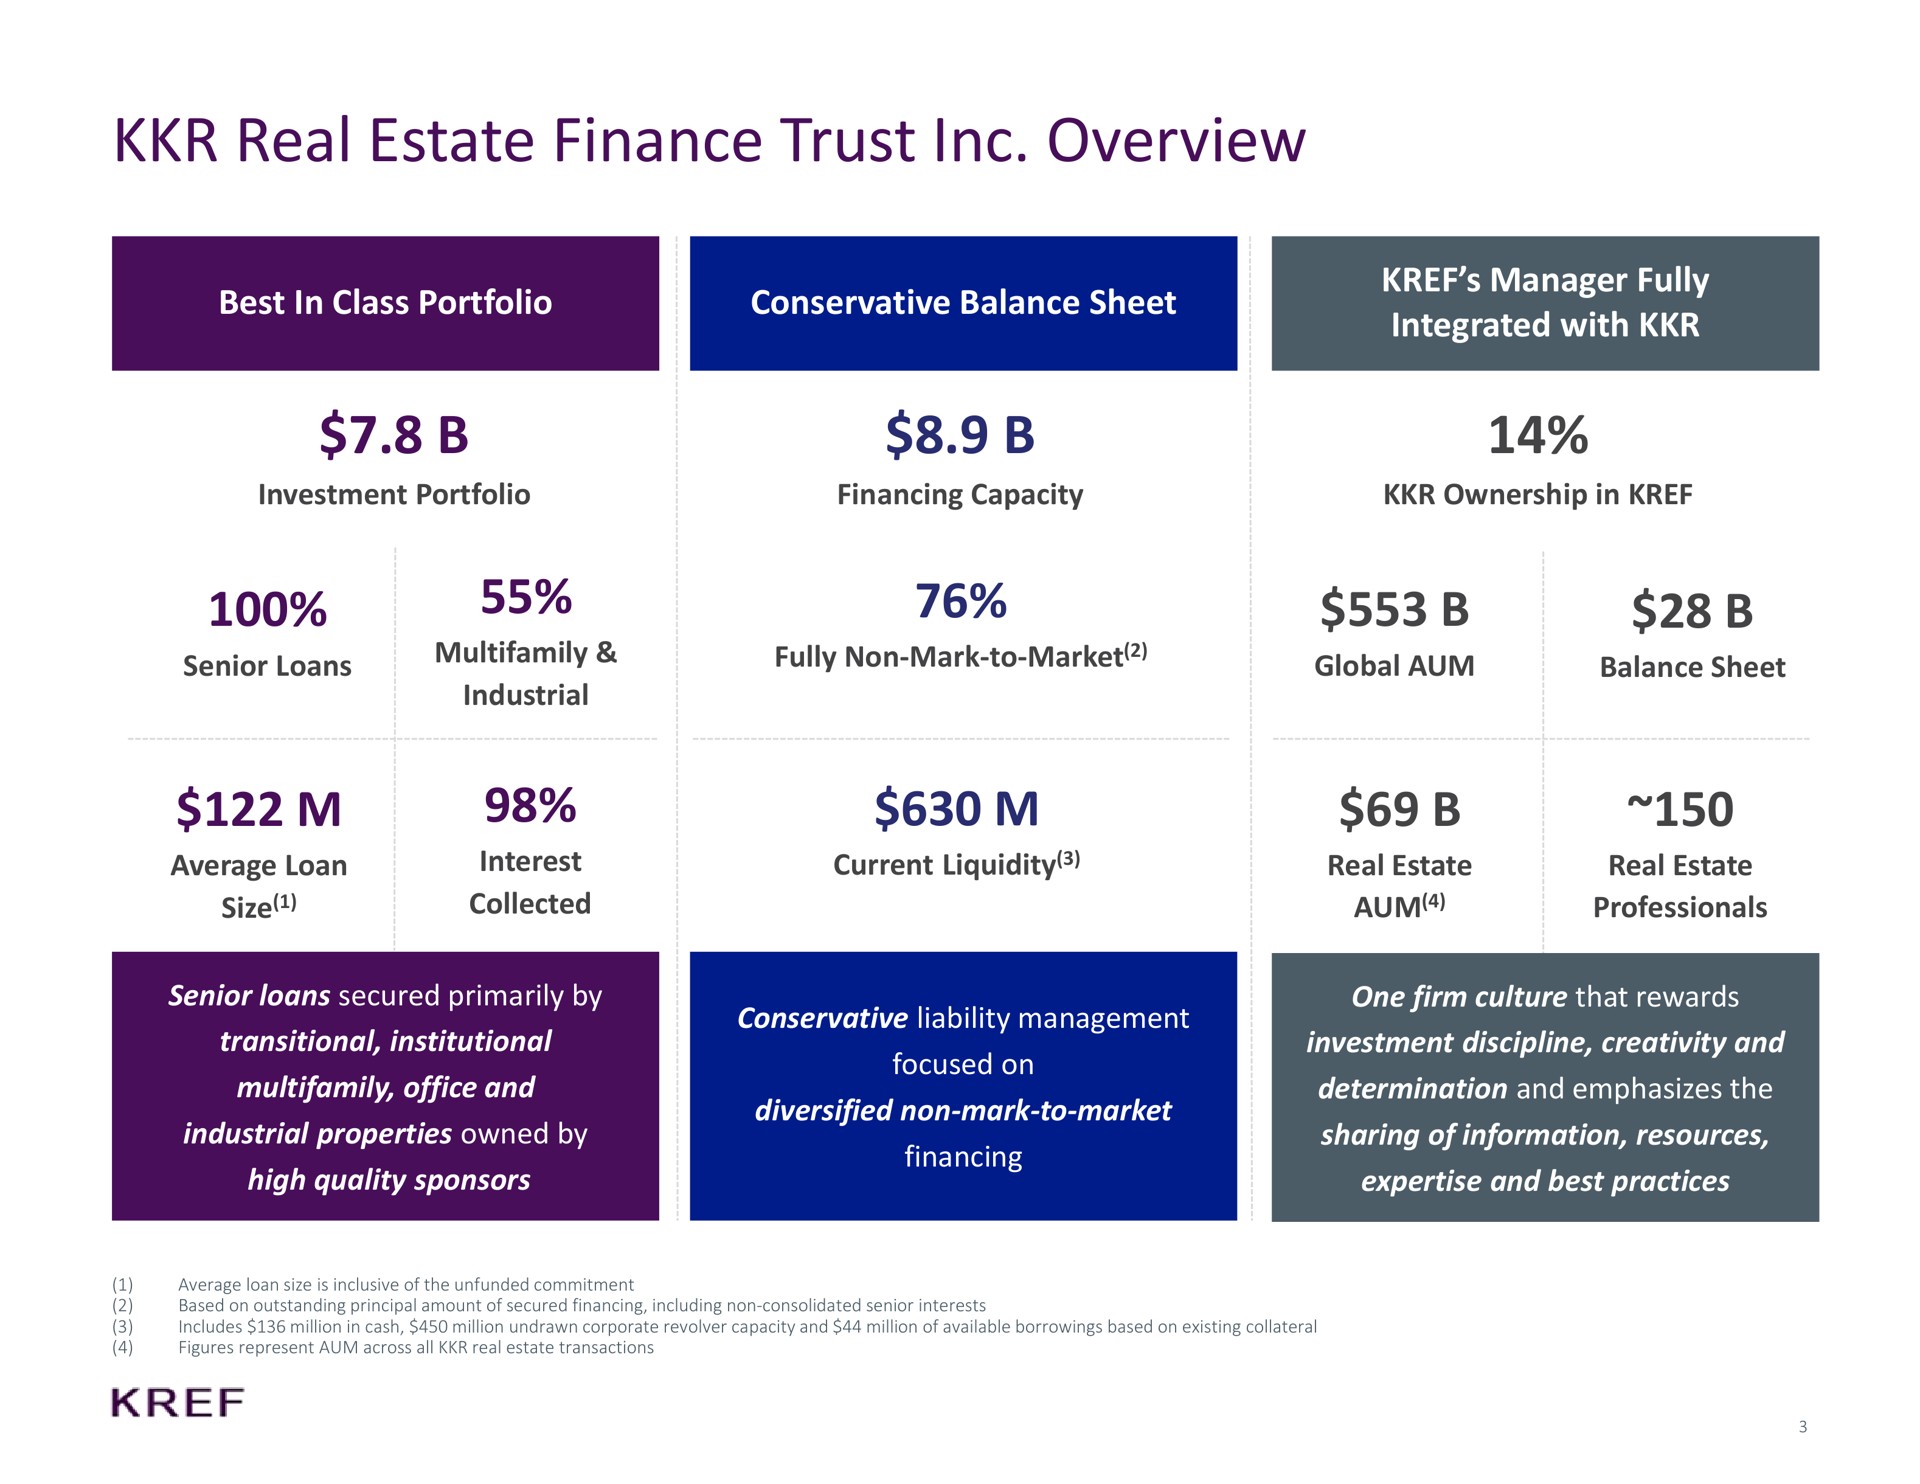 real estate finance trust overview best in class portfolio conservative balance sheet manager fully integrated with | KKR Real Estate Finance Trust